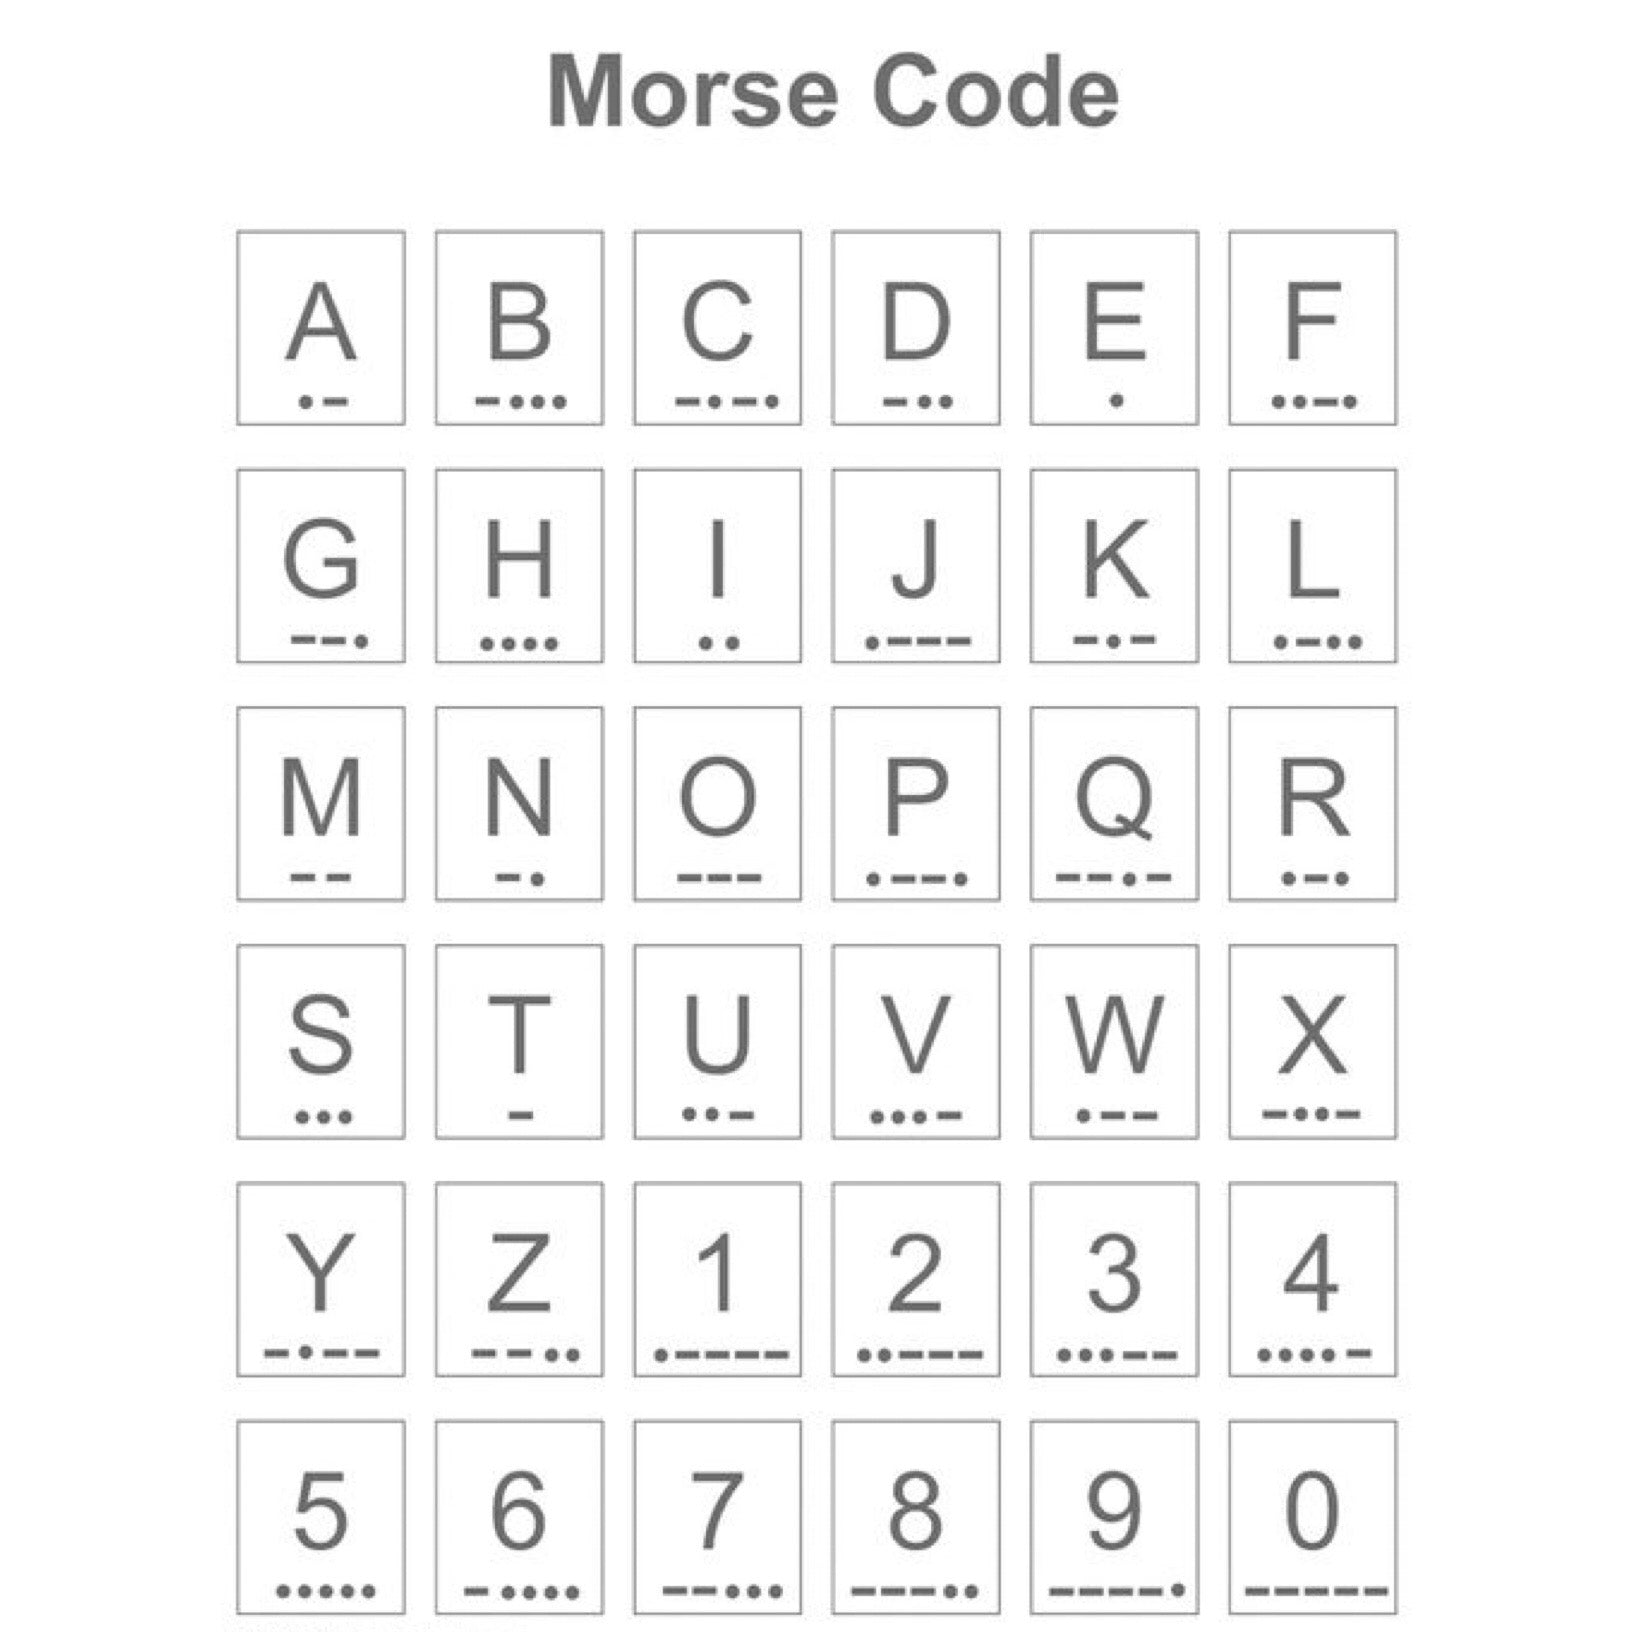 Chart of the Morse Code 26 letters and 10 numerals - Trisha Flanagan